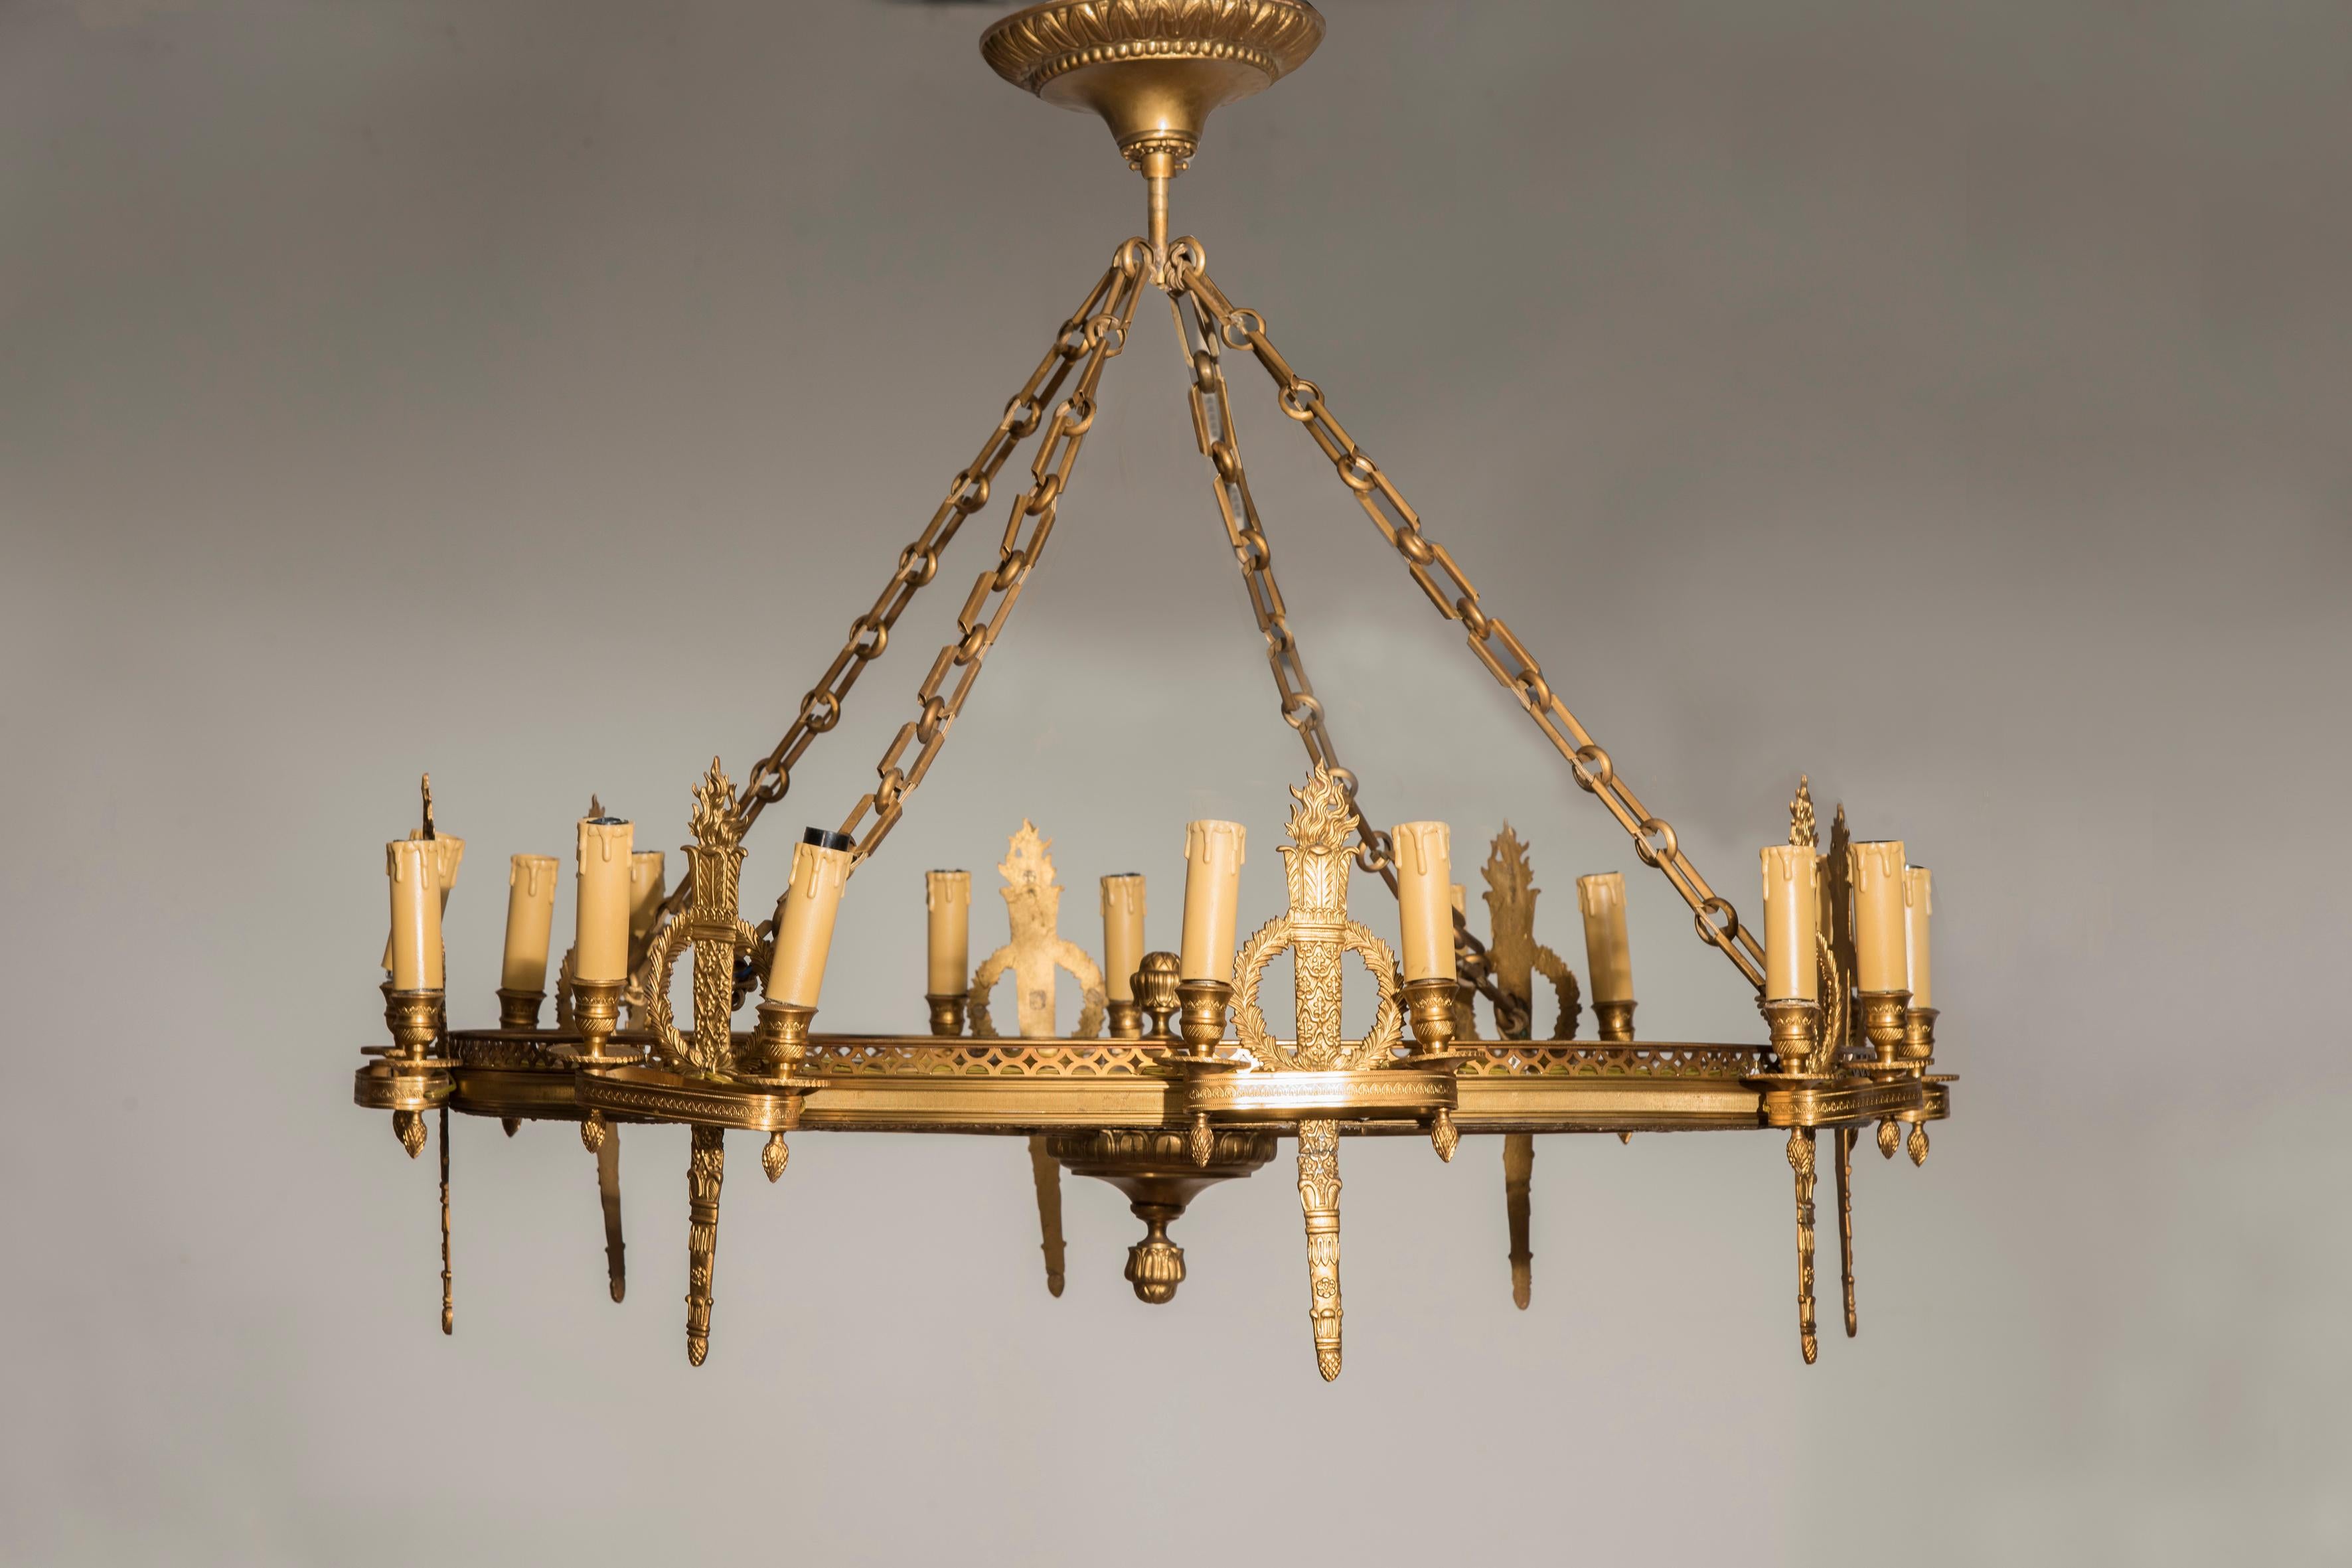 Napoleon III golden bronze eight lights rounded chandelier, from France from late 19th century in correspondence of each light holder there is quiver shaped bronze decoration. 

The chandelier is in excellent conditions. we have completely